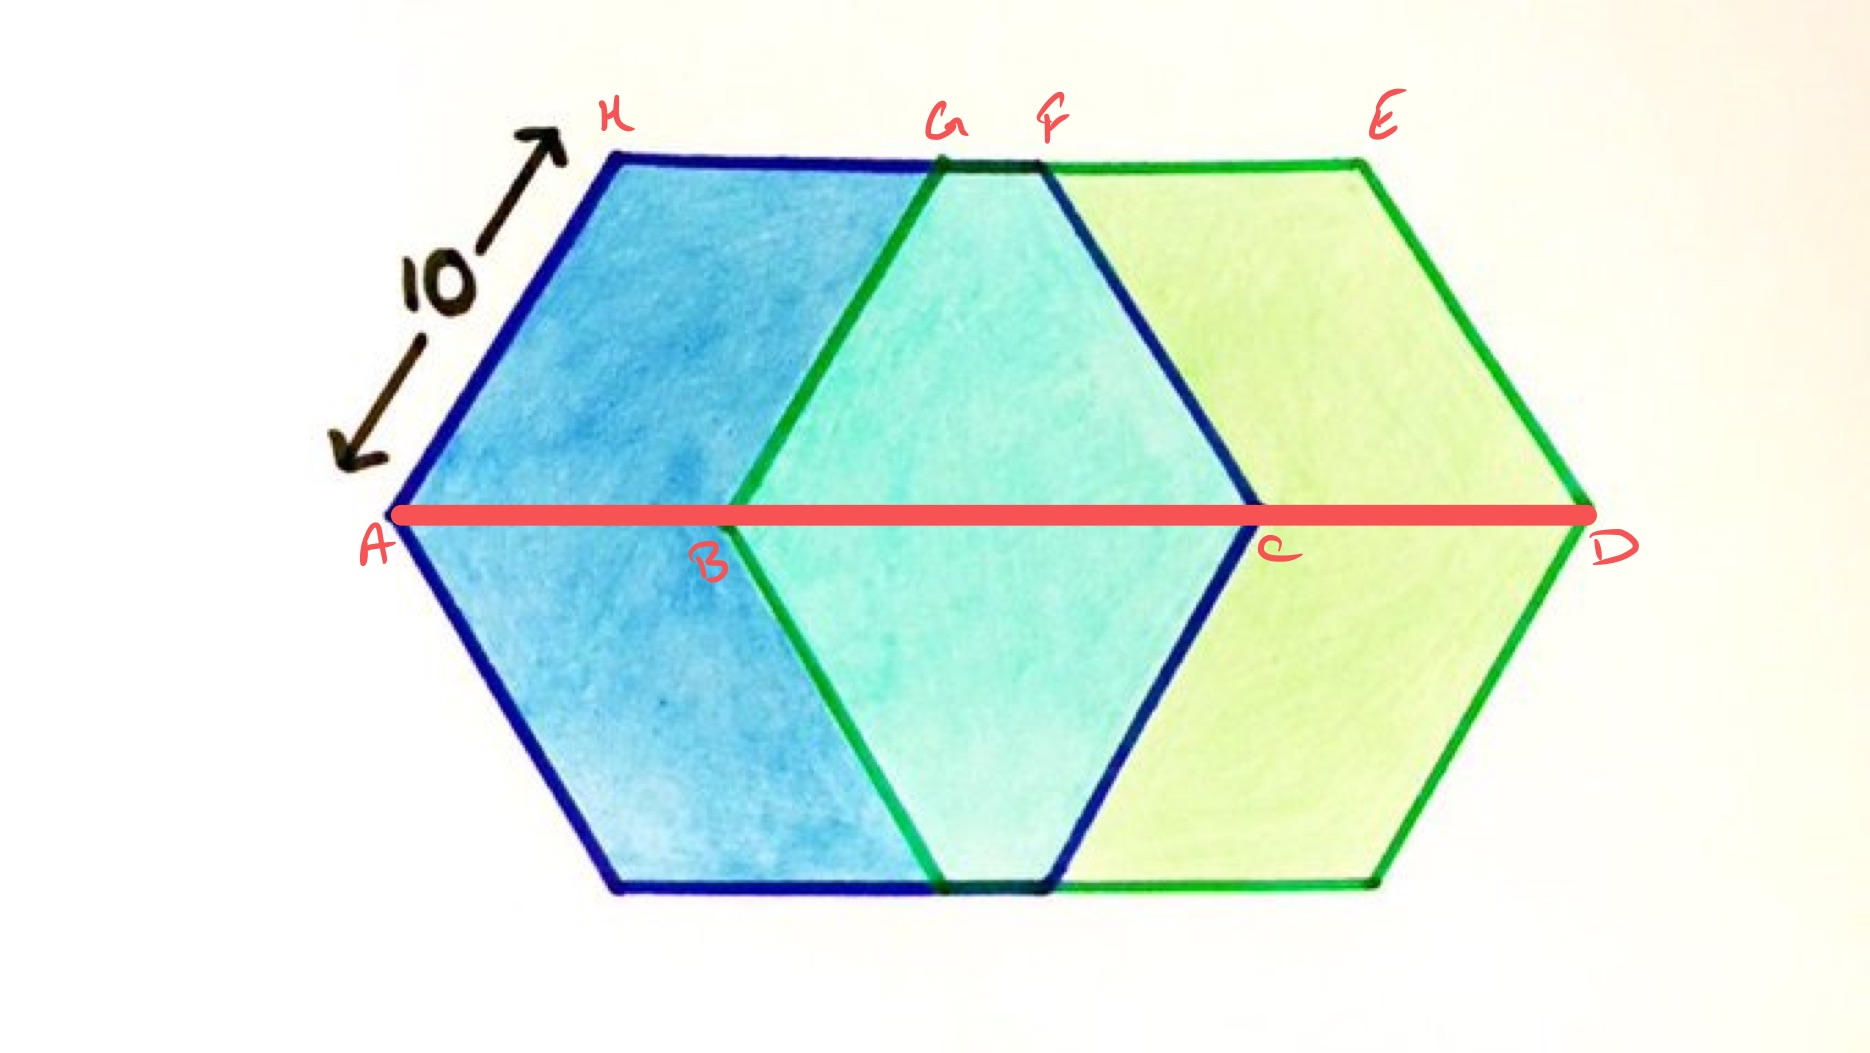 Overlapping hexagons labelled